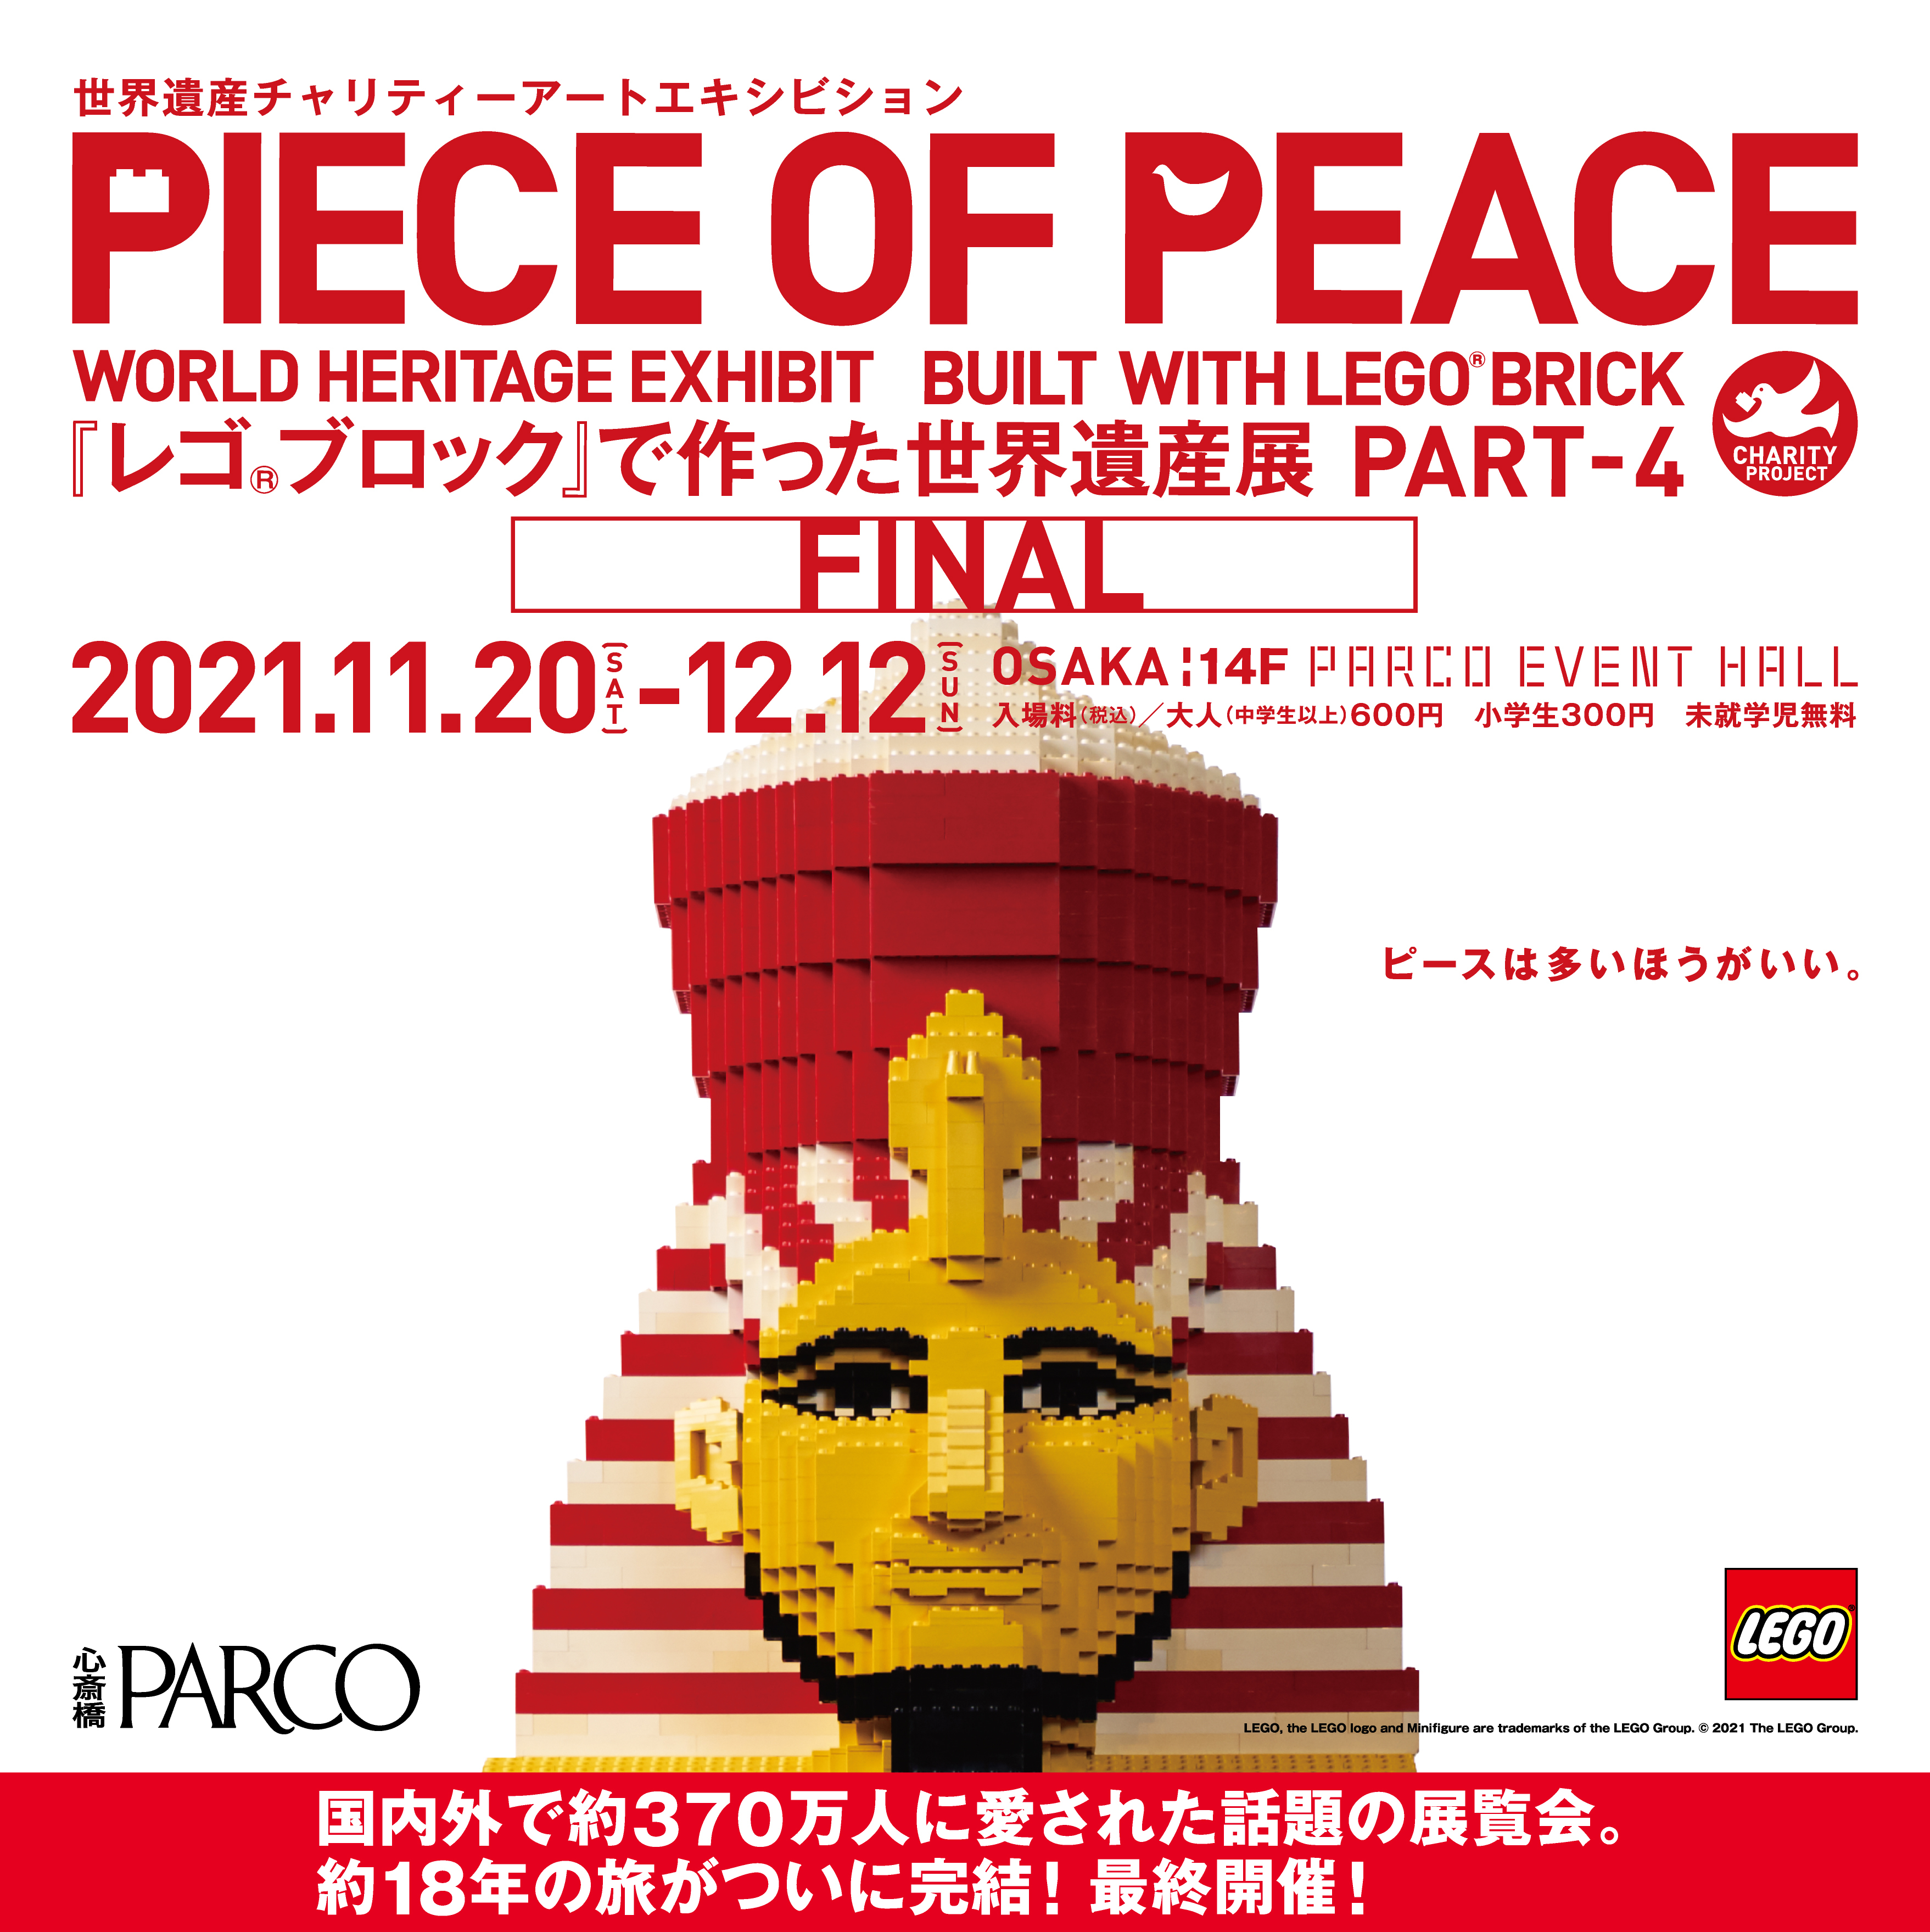 (c)PIECE OF PEACE LEGO,the LEGO logo and Minifigure are trademarks of the LEGO Group.(c)2021 The LEGO Group.